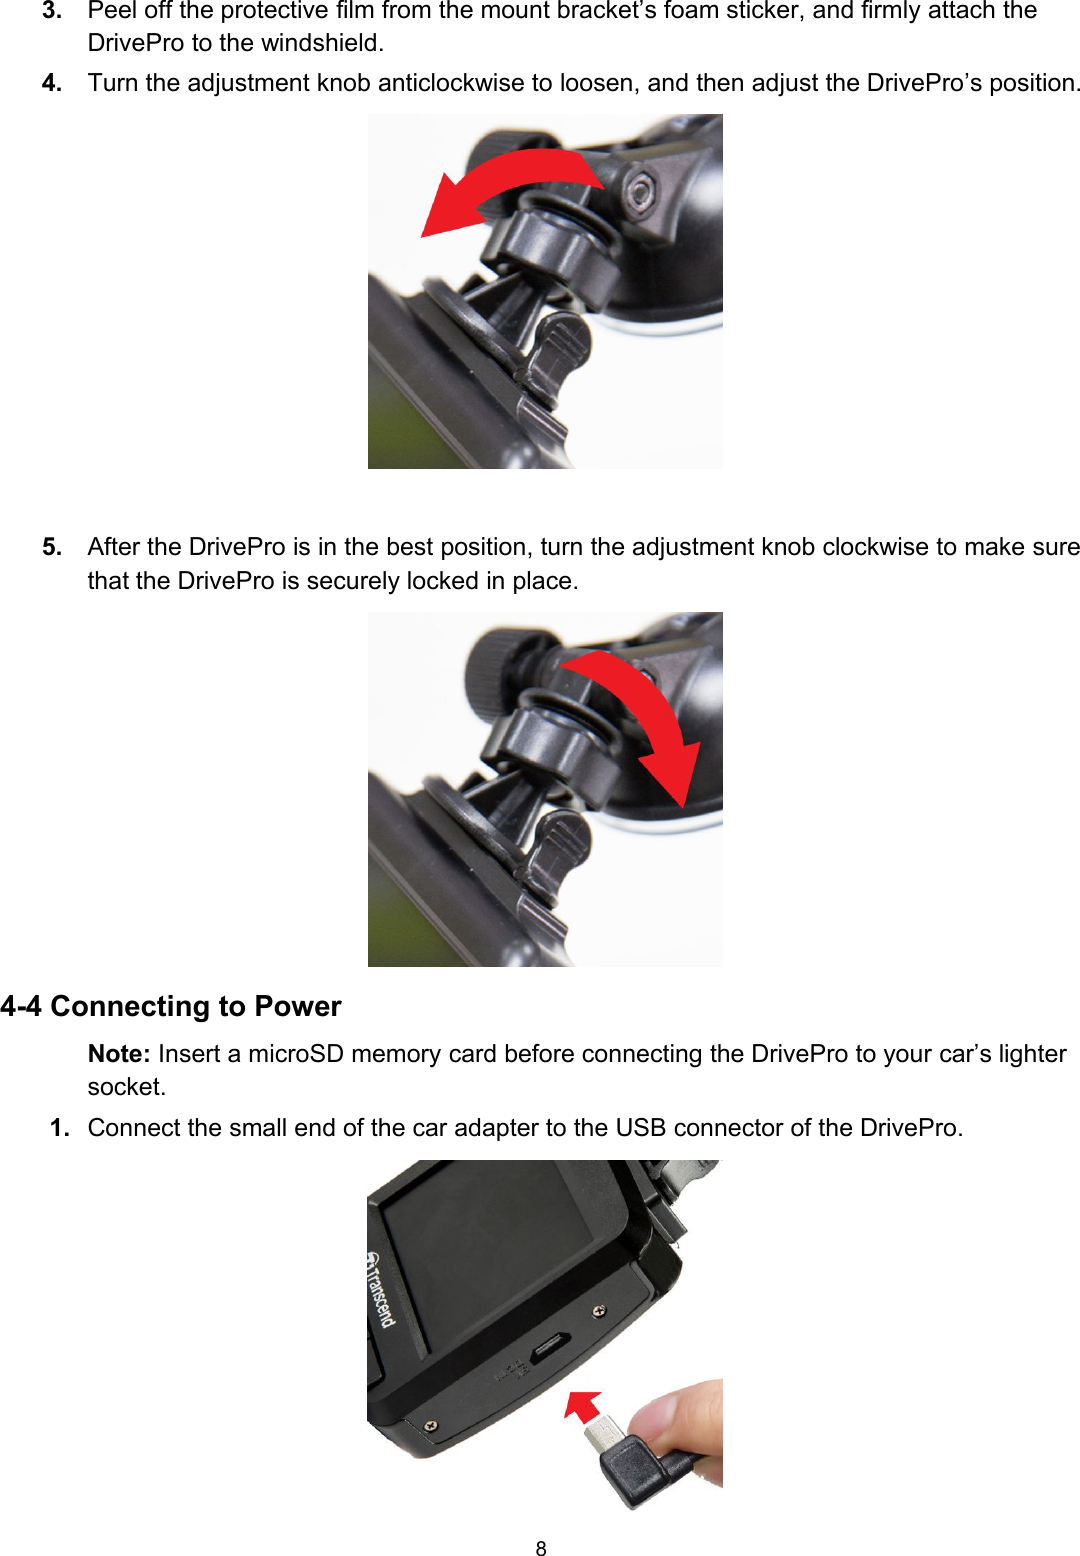 83. Peel off the protective film from the mount bracket’s foam sticker, and firmly attach theDrivePro to the windshield.4. Turn the adjustment knob anticlockwise to loosen, and then adjust the DrivePro’s position.5. After the DrivePro is in the best position, turn the adjustment knob clockwise to make surethat the DrivePro is securely locked in place.4-4 Connecting to PowerNote: Insert a microSD memory card before connecting the DrivePro to your car’s lightersocket.1. Connect the small end of the car adapter to the USB connector of the DrivePro.